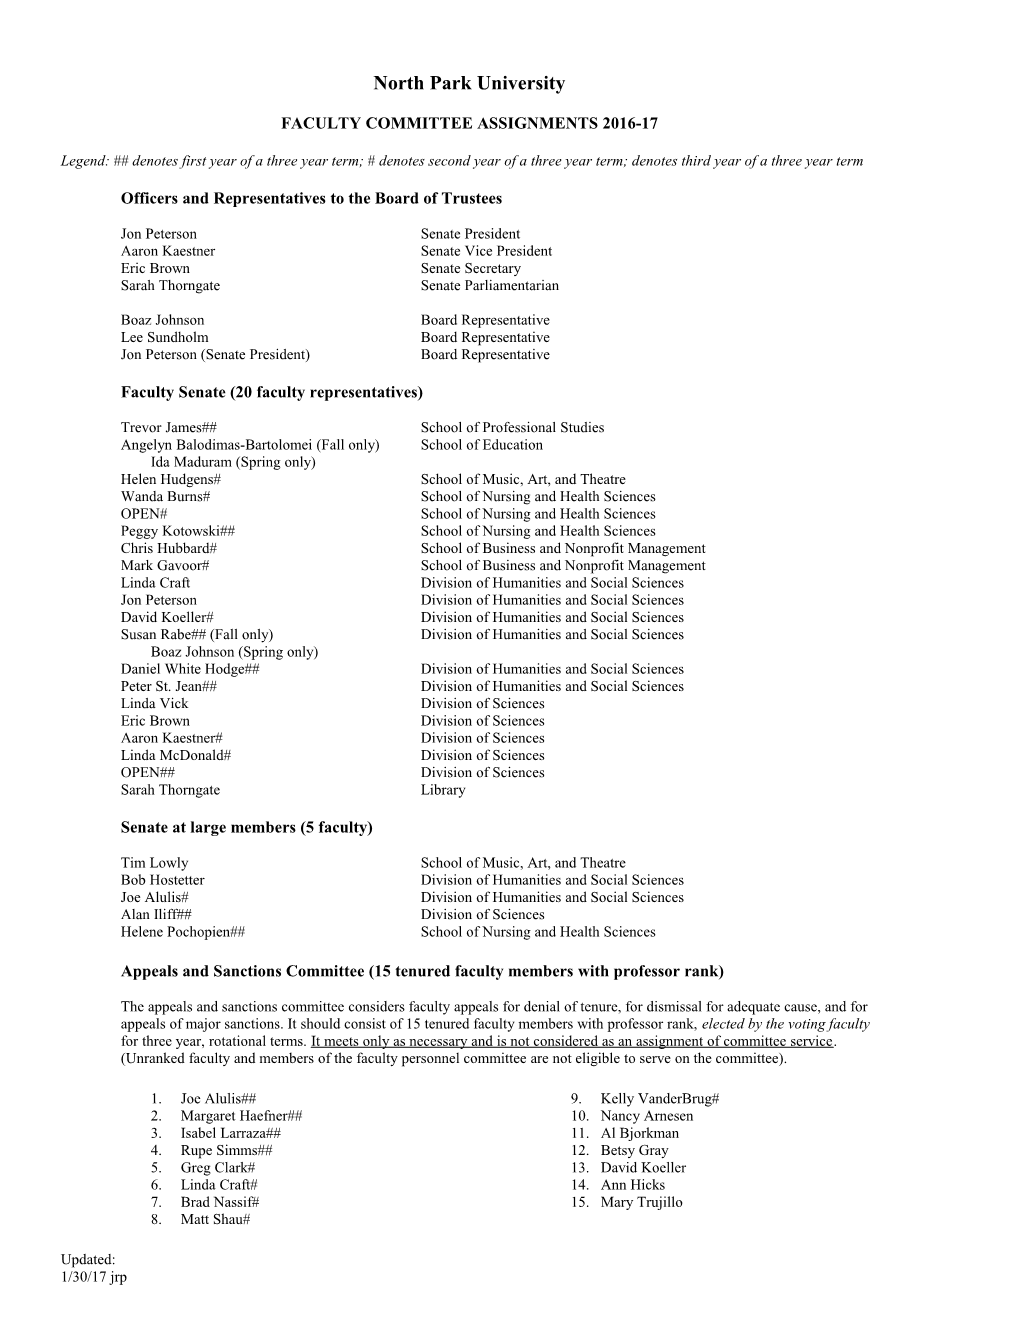 Committee Assignments for Faculty and Staff, 2012-13